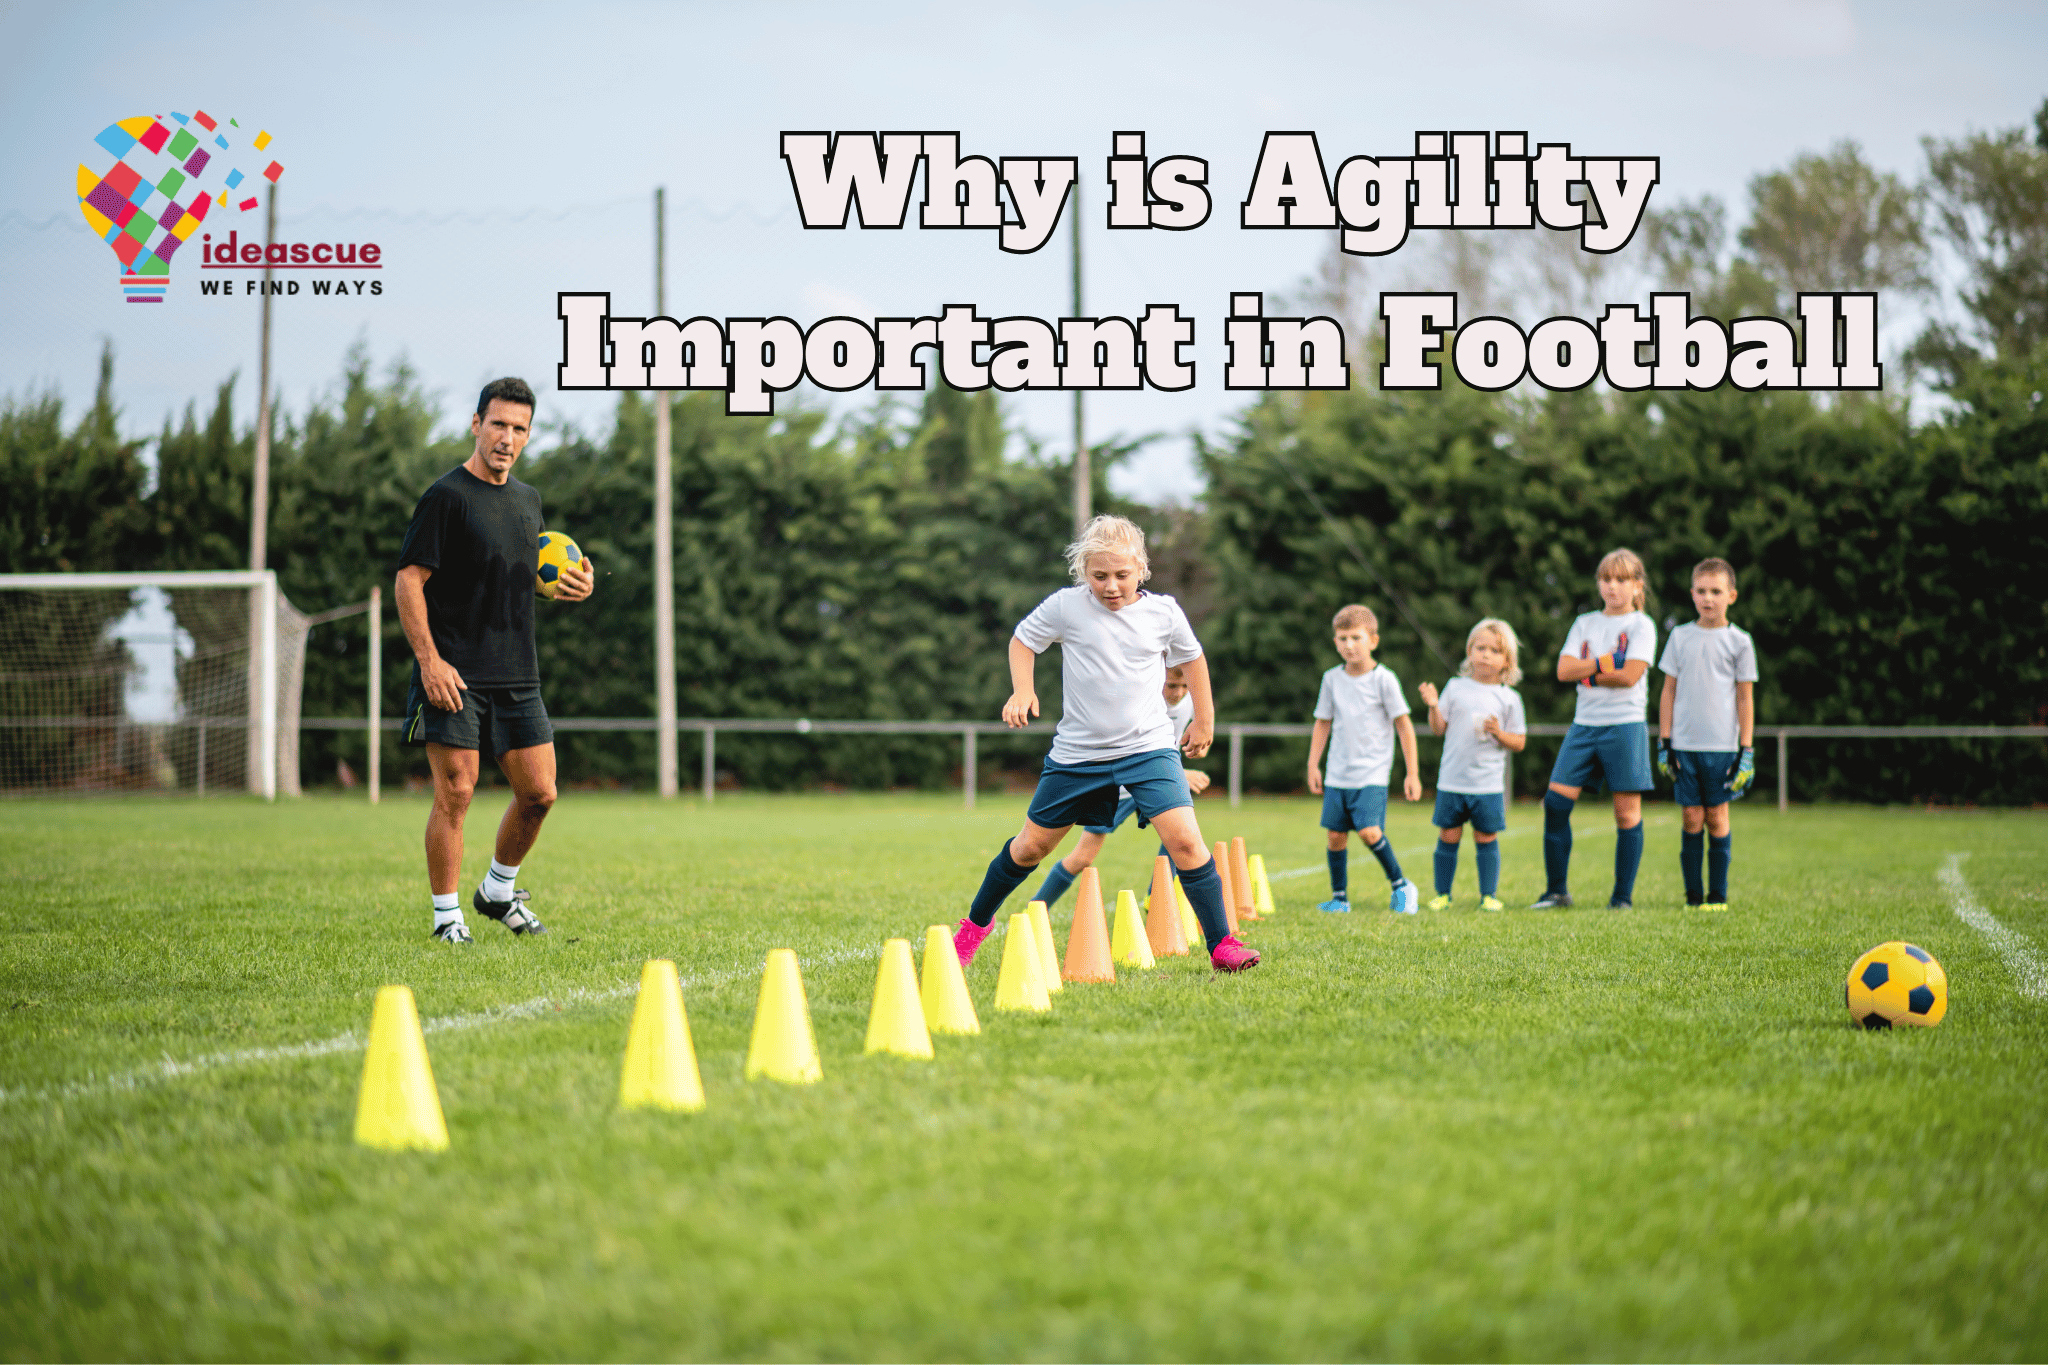 What is Agility and Speed in Football?